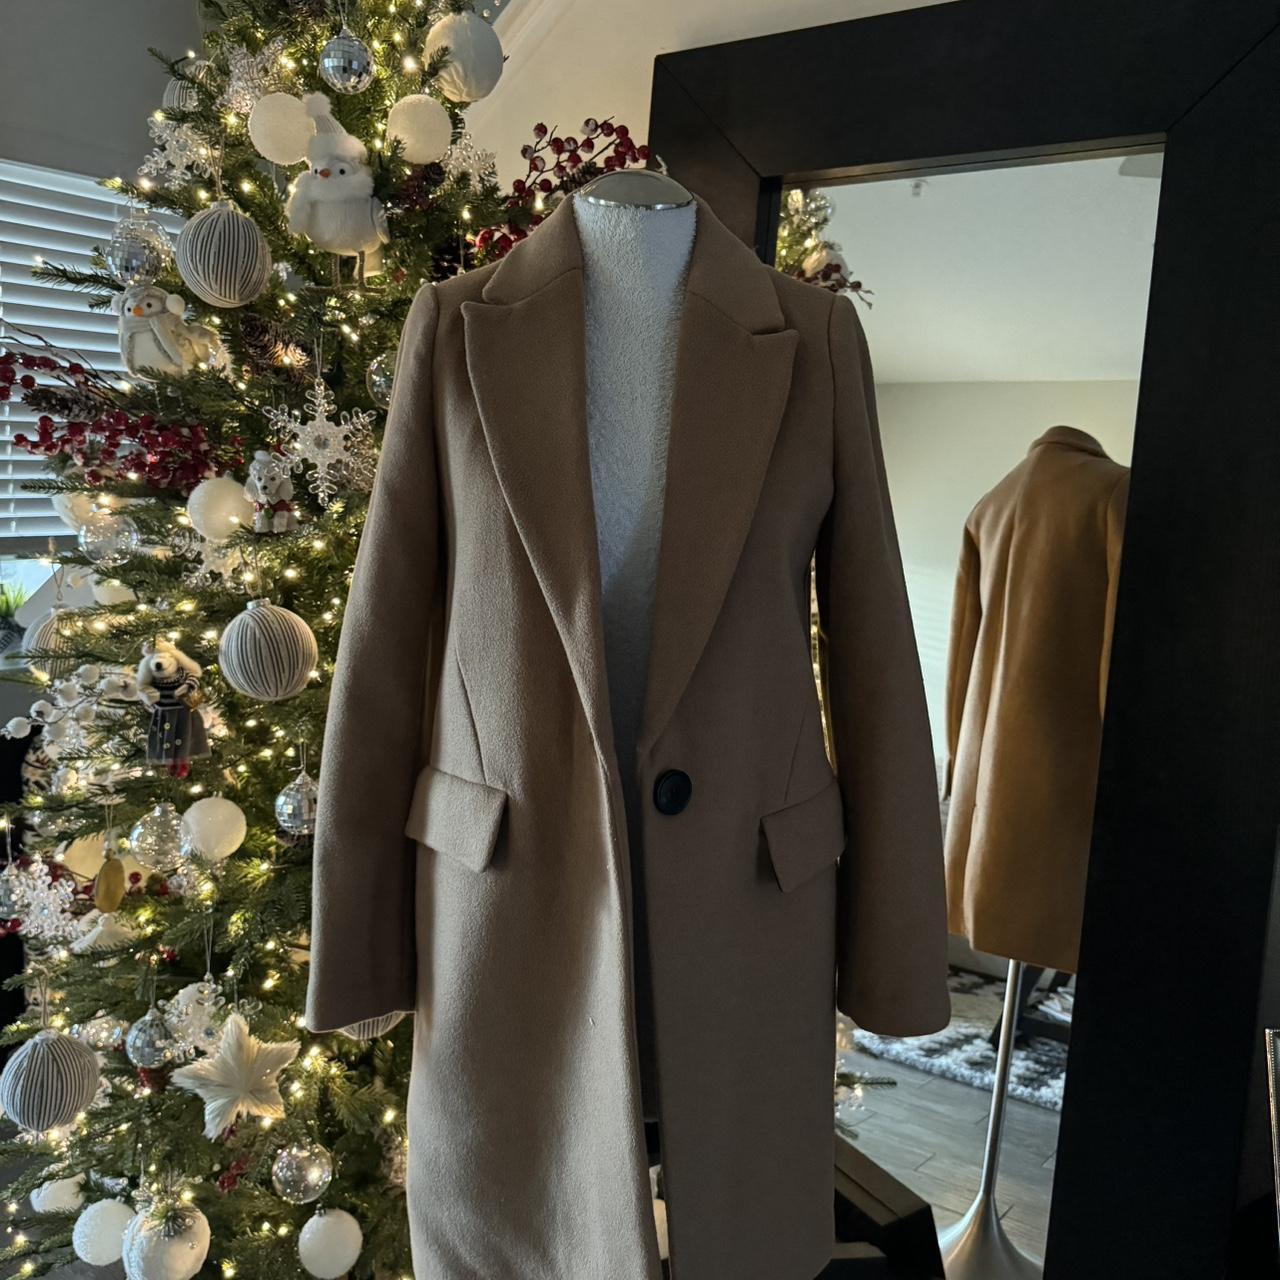 Zara long coat brand new condition only worn once - Depop